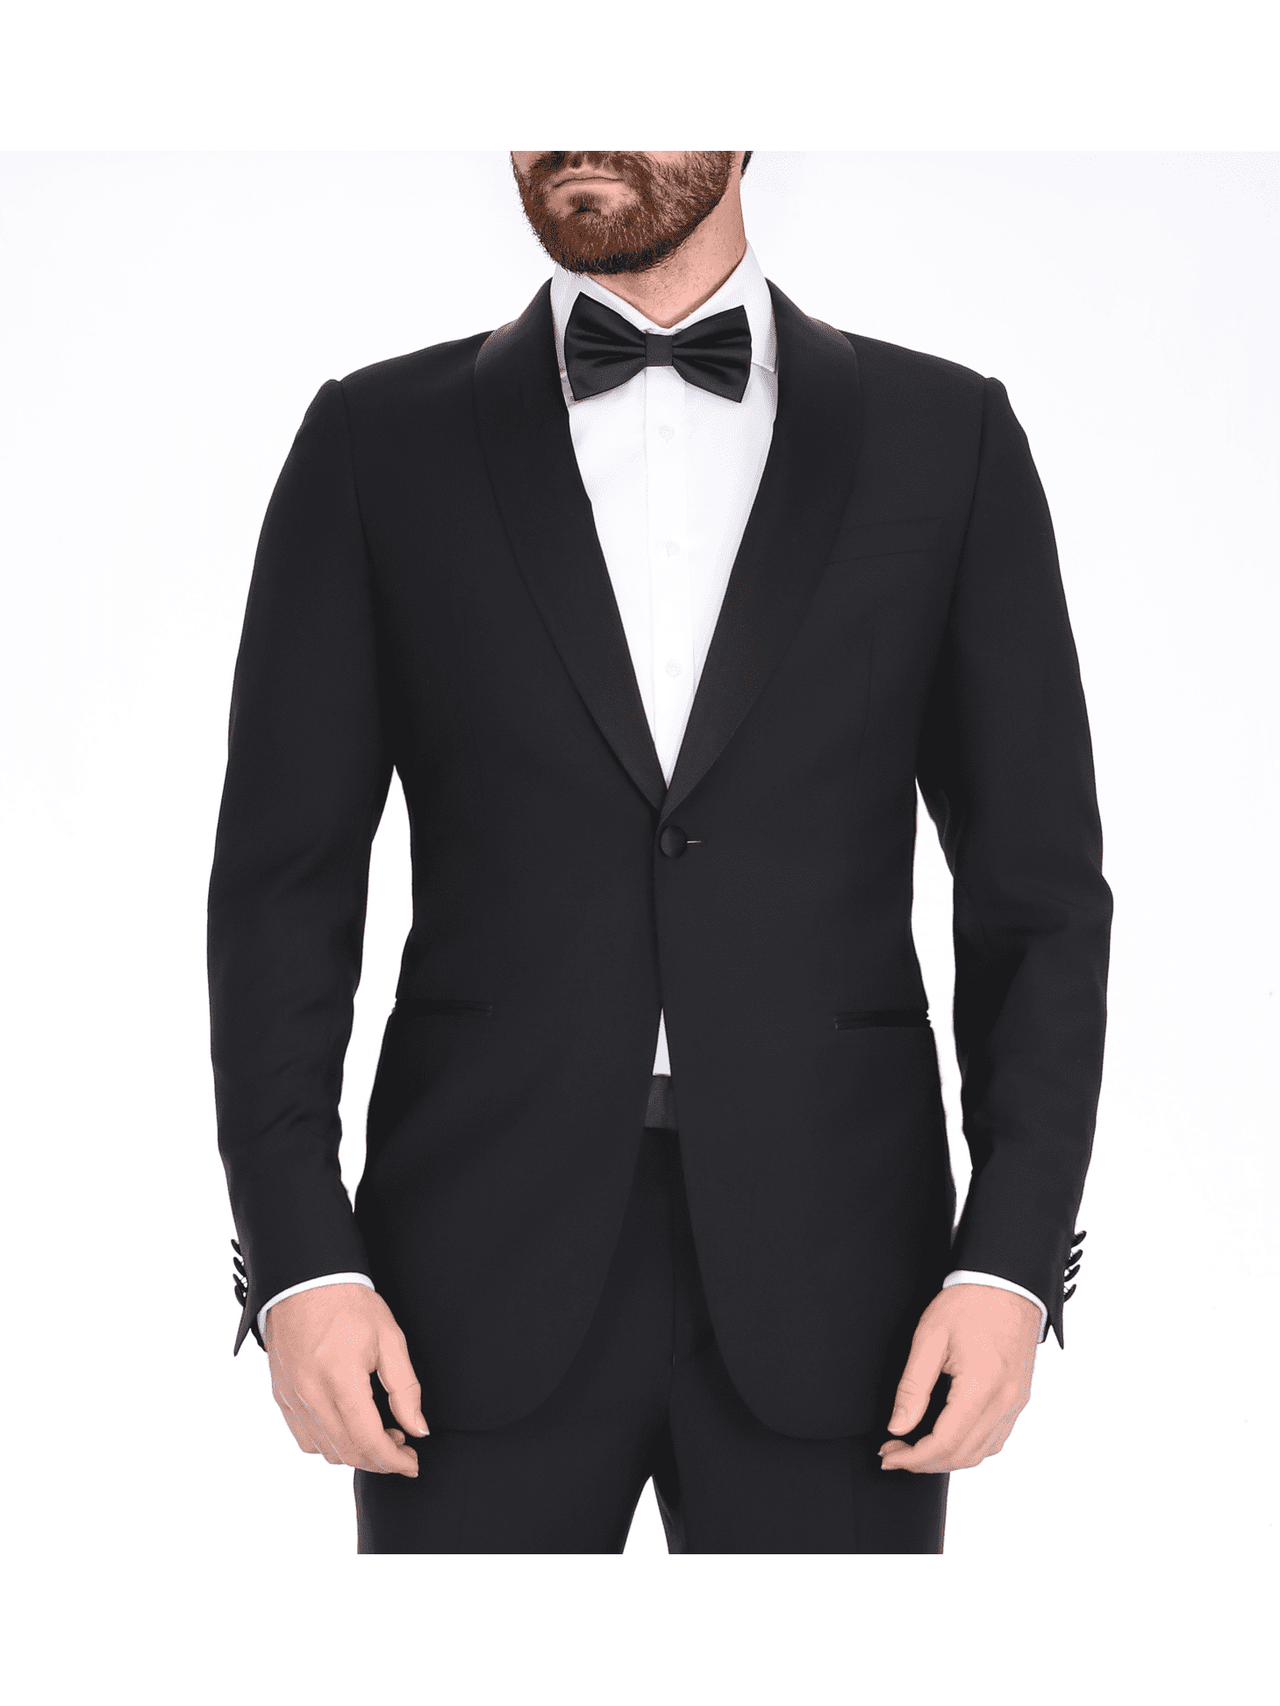 Blujacket TUXEDOS Blujacket Mens Solid Black 100% Wool Regular Fit Tuxedo Suit With Shawl Lapel